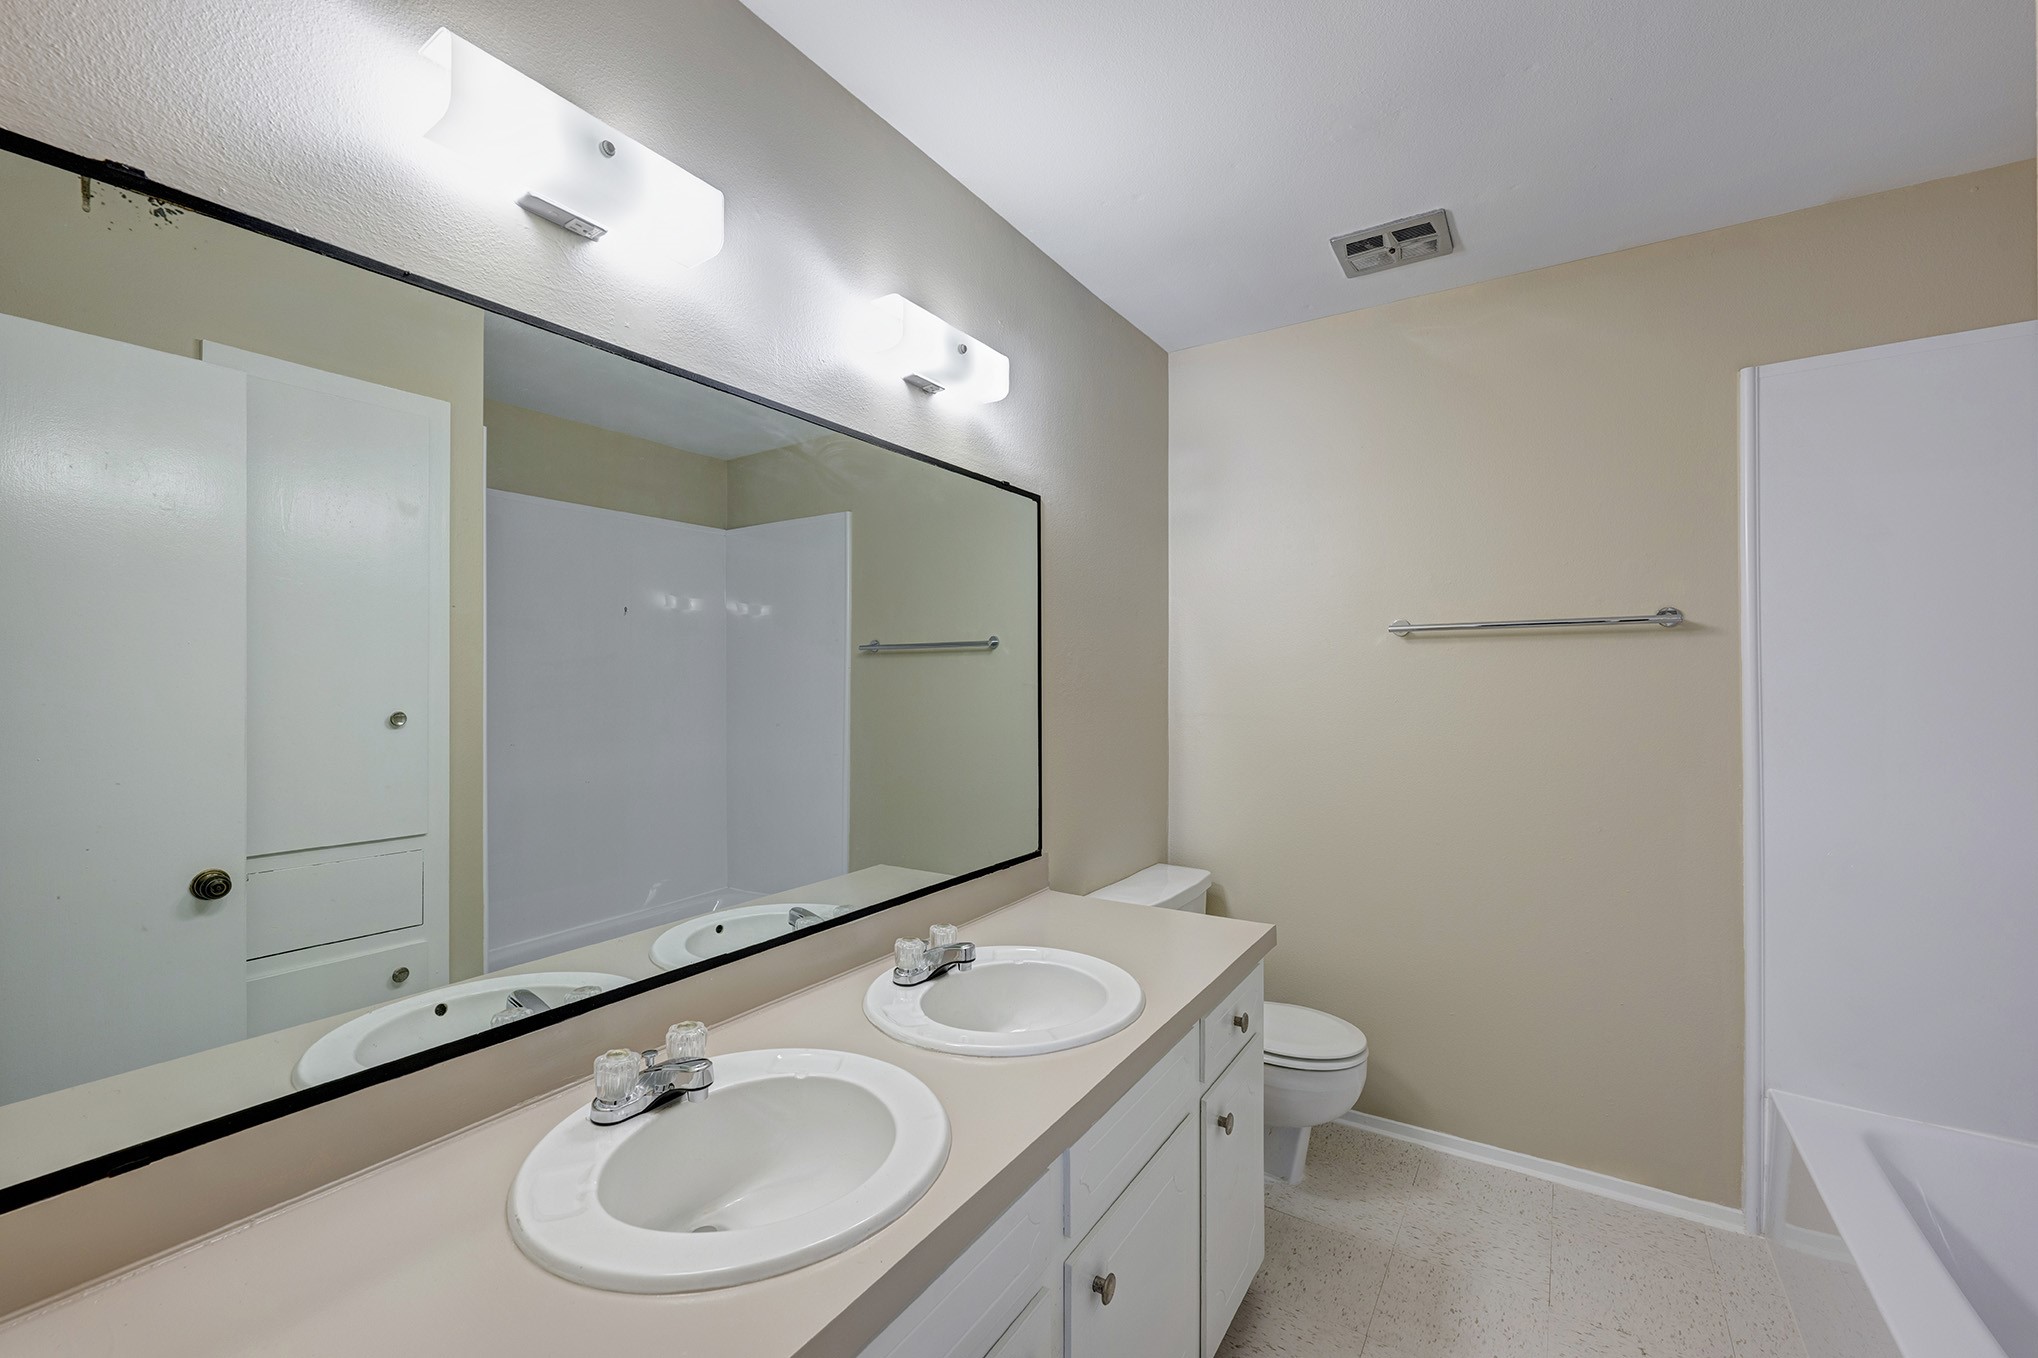 Full bathroom in the two bedroom unit. Located upstairs with the bedrooms.